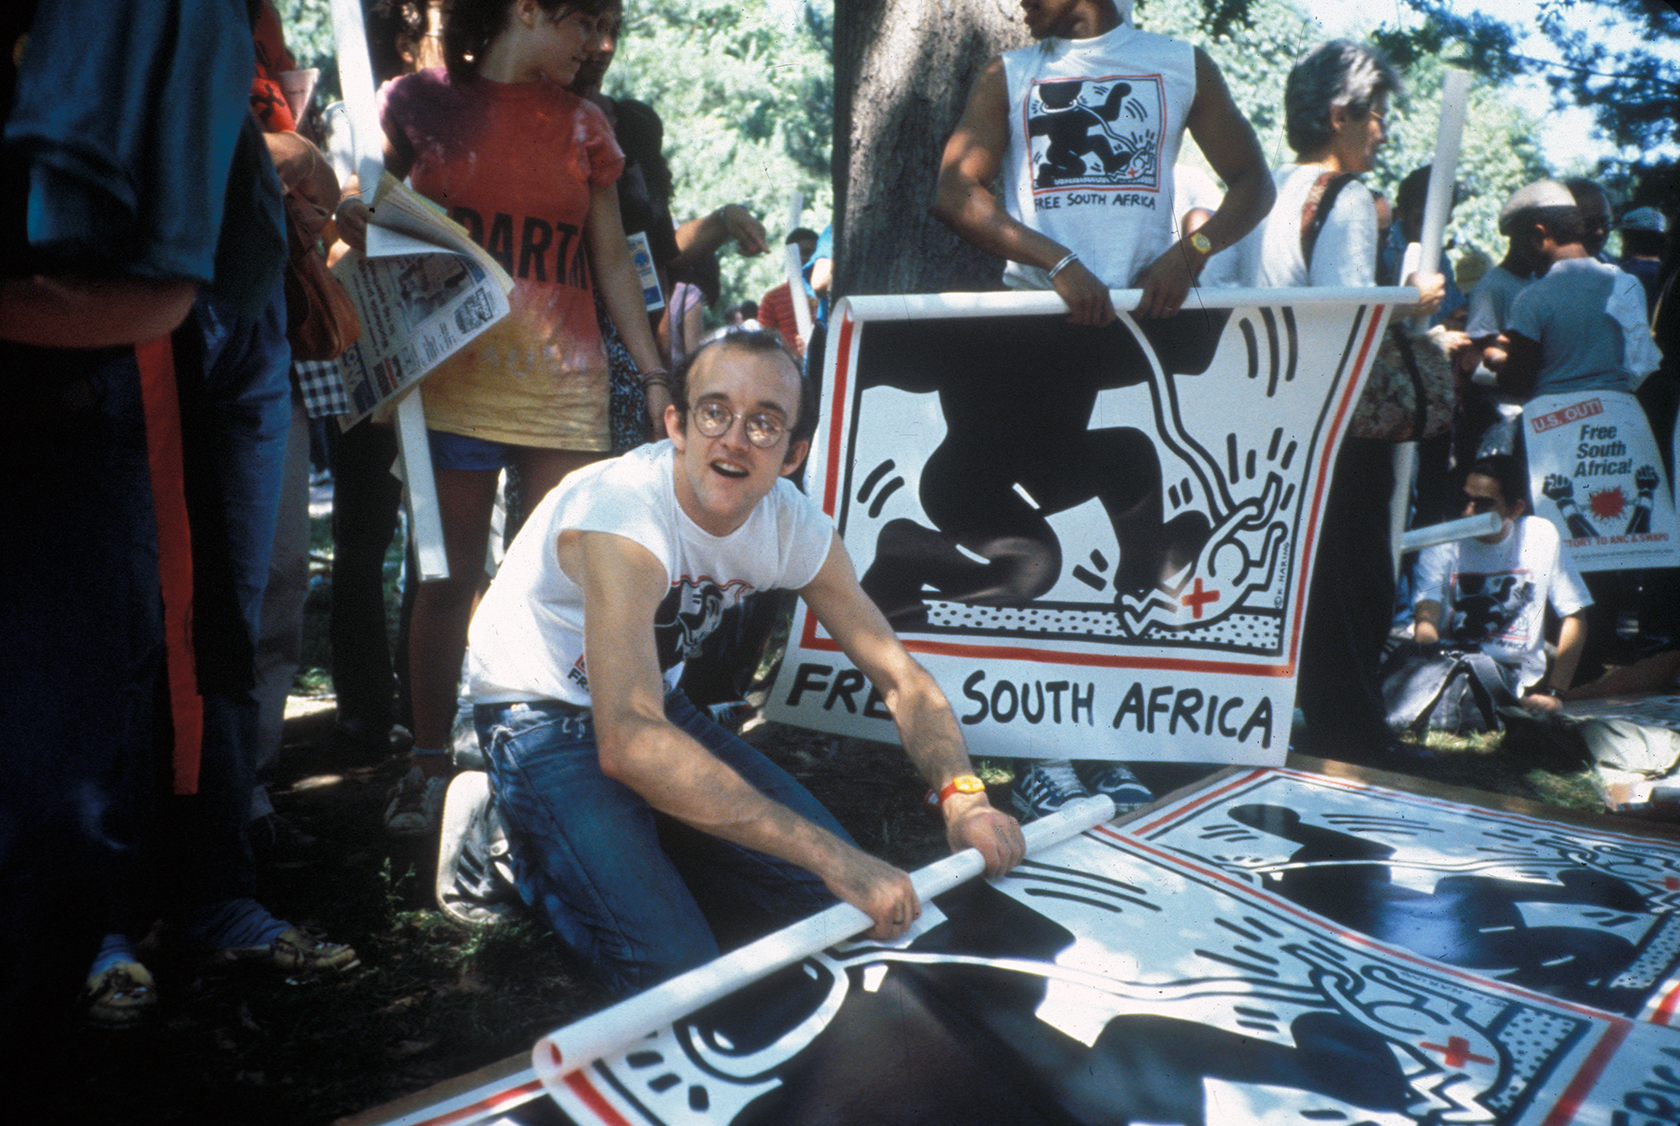 Free South Africa rally